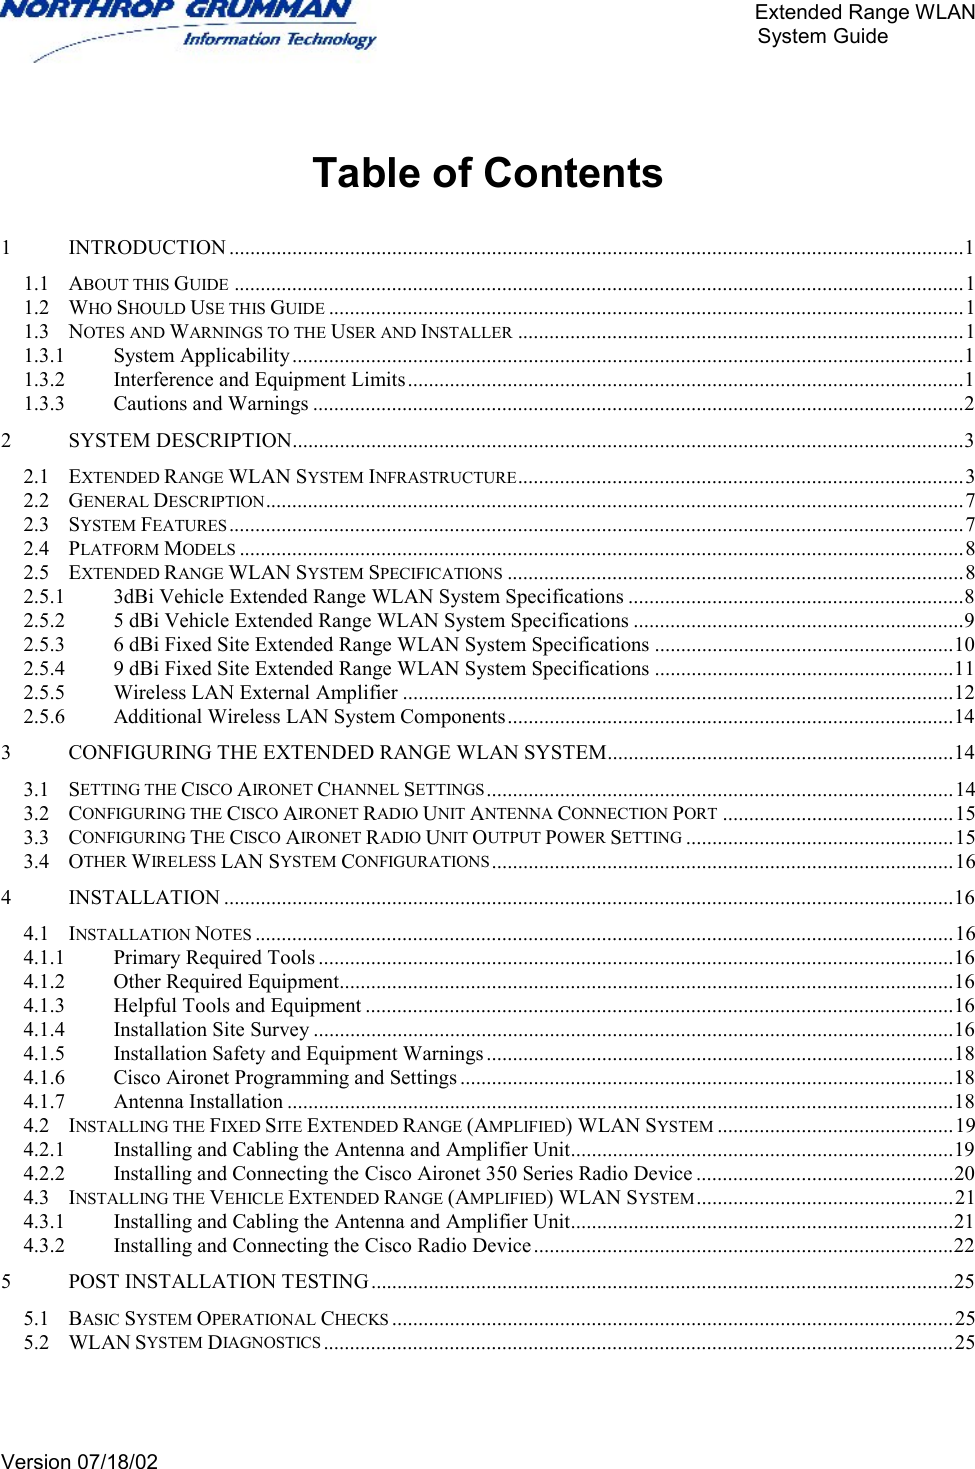       Extended Range WLAN                                                     System Guide     Version 07/18/02    Table of Contents  1 INTRODUCTION ............................................................................................................................................1 1.1 ABOUT THIS GUIDE ...........................................................................................................................................1 1.2 WHO SHOULD USE THIS GUIDE .........................................................................................................................1 1.3 NOTES AND WARNINGS TO THE USER AND INSTALLER .....................................................................................1 1.3.1 System Applicability................................................................................................................................1 1.3.2 Interference and Equipment Limits..........................................................................................................1 1.3.3 Cautions and Warnings ............................................................................................................................2 2 SYSTEM DESCRIPTION................................................................................................................................3 2.1 EXTENDED RANGE WLAN SYSTEM INFRASTRUCTURE.....................................................................................3 2.2 GENERAL DESCRIPTION.....................................................................................................................................7 2.3 SYSTEM FEATURES............................................................................................................................................7 2.4 PLATFORM MODELS ..........................................................................................................................................8 2.5 EXTENDED RANGE WLAN SYSTEM SPECIFICATIONS .......................................................................................8 2.5.1 3dBi Vehicle Extended Range WLAN System Specifications ................................................................8 2.5.2 5 dBi Vehicle Extended Range WLAN System Specifications ...............................................................9 2.5.3 6 dBi Fixed Site Extended Range WLAN System Specifications .........................................................10 2.5.4 9 dBi Fixed Site Extended Range WLAN System Specifications .........................................................11 2.5.5 Wireless LAN External Amplifier .........................................................................................................12 2.5.6 Additional Wireless LAN System Components.....................................................................................14 3 CONFIGURING THE EXTENDED RANGE WLAN SYSTEM..................................................................14 3.1 SETTING THE CISCO AIRONET CHANNEL SETTINGS.........................................................................................14 3.2 CONFIGURING THE CISCO AIRONET RADIO UNIT ANTENNA CONNECTION PORT ............................................15 3.3 CONFIGURING THE CISCO AIRONET RADIO UNIT OUTPUT POWER SETTING ...................................................15 3.4 OTHER WIRELESS LAN SYSTEM CONFIGURATIONS ........................................................................................16 4 INSTALLATION ...........................................................................................................................................16 4.1 INSTALLATION NOTES .....................................................................................................................................16 4.1.1 Primary Required Tools .........................................................................................................................16 4.1.2 Other Required Equipment.....................................................................................................................16 4.1.3 Helpful Tools and Equipment ................................................................................................................16 4.1.4 Installation Site Survey ..........................................................................................................................16 4.1.5 Installation Safety and Equipment Warnings .........................................................................................18 4.1.6 Cisco Aironet Programming and Settings ..............................................................................................18 4.1.7 Antenna Installation ...............................................................................................................................18 4.2 INSTALLING THE FIXED SITE EXTENDED RANGE (AMPLIFIED) WLAN SYSTEM .............................................19 4.2.1 Installing and Cabling the Antenna and Amplifier Unit.........................................................................19 4.2.2 Installing and Connecting the Cisco Aironet 350 Series Radio Device .................................................20 4.3 INSTALLING THE VEHICLE EXTENDED RANGE (AMPLIFIED) WLAN SYSTEM.................................................21 4.3.1 Installing and Cabling the Antenna and Amplifier Unit.........................................................................21 4.3.2 Installing and Connecting the Cisco Radio Device................................................................................22 5 POST INSTALLATION TESTING...............................................................................................................25 5.1 BASIC SYSTEM OPERATIONAL CHECKS ...........................................................................................................25 5.2 WLAN SYSTEM DIAGNOSTICS ........................................................................................................................25    